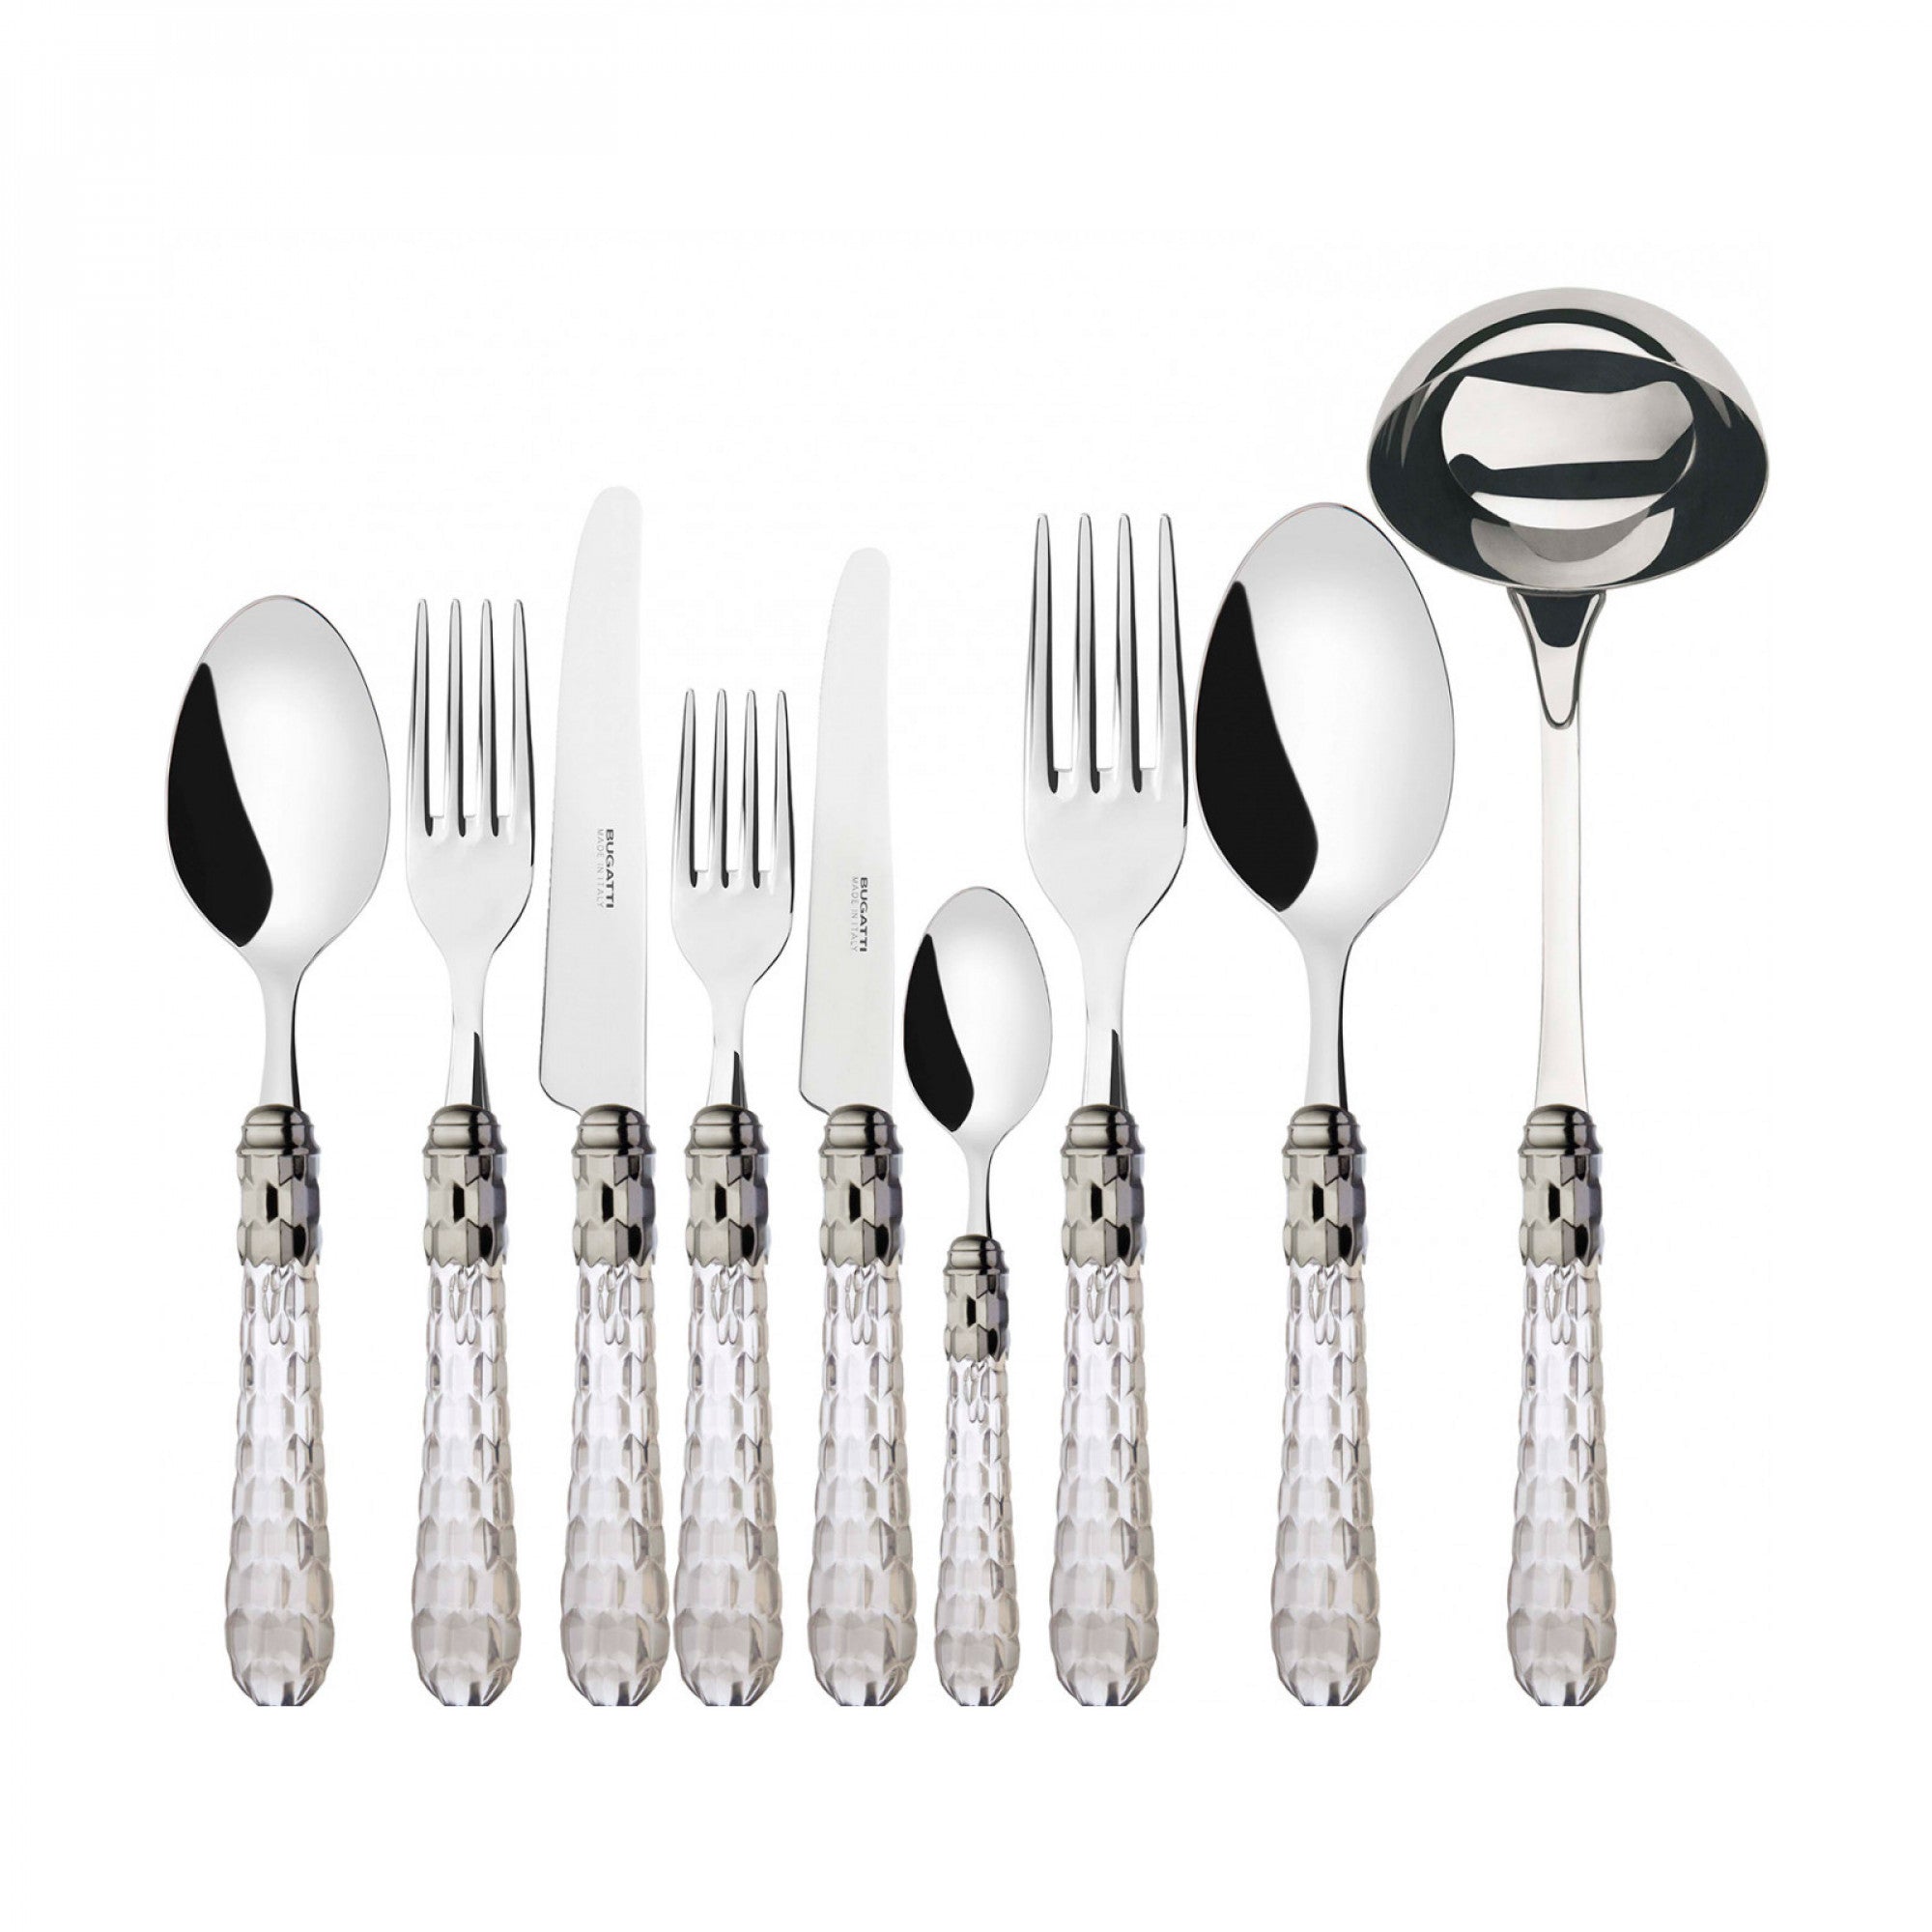 BUGATTI, Cristallo, 75-piece cutlery set in 18/10 stainless steel, chromed ring and transparent color handle